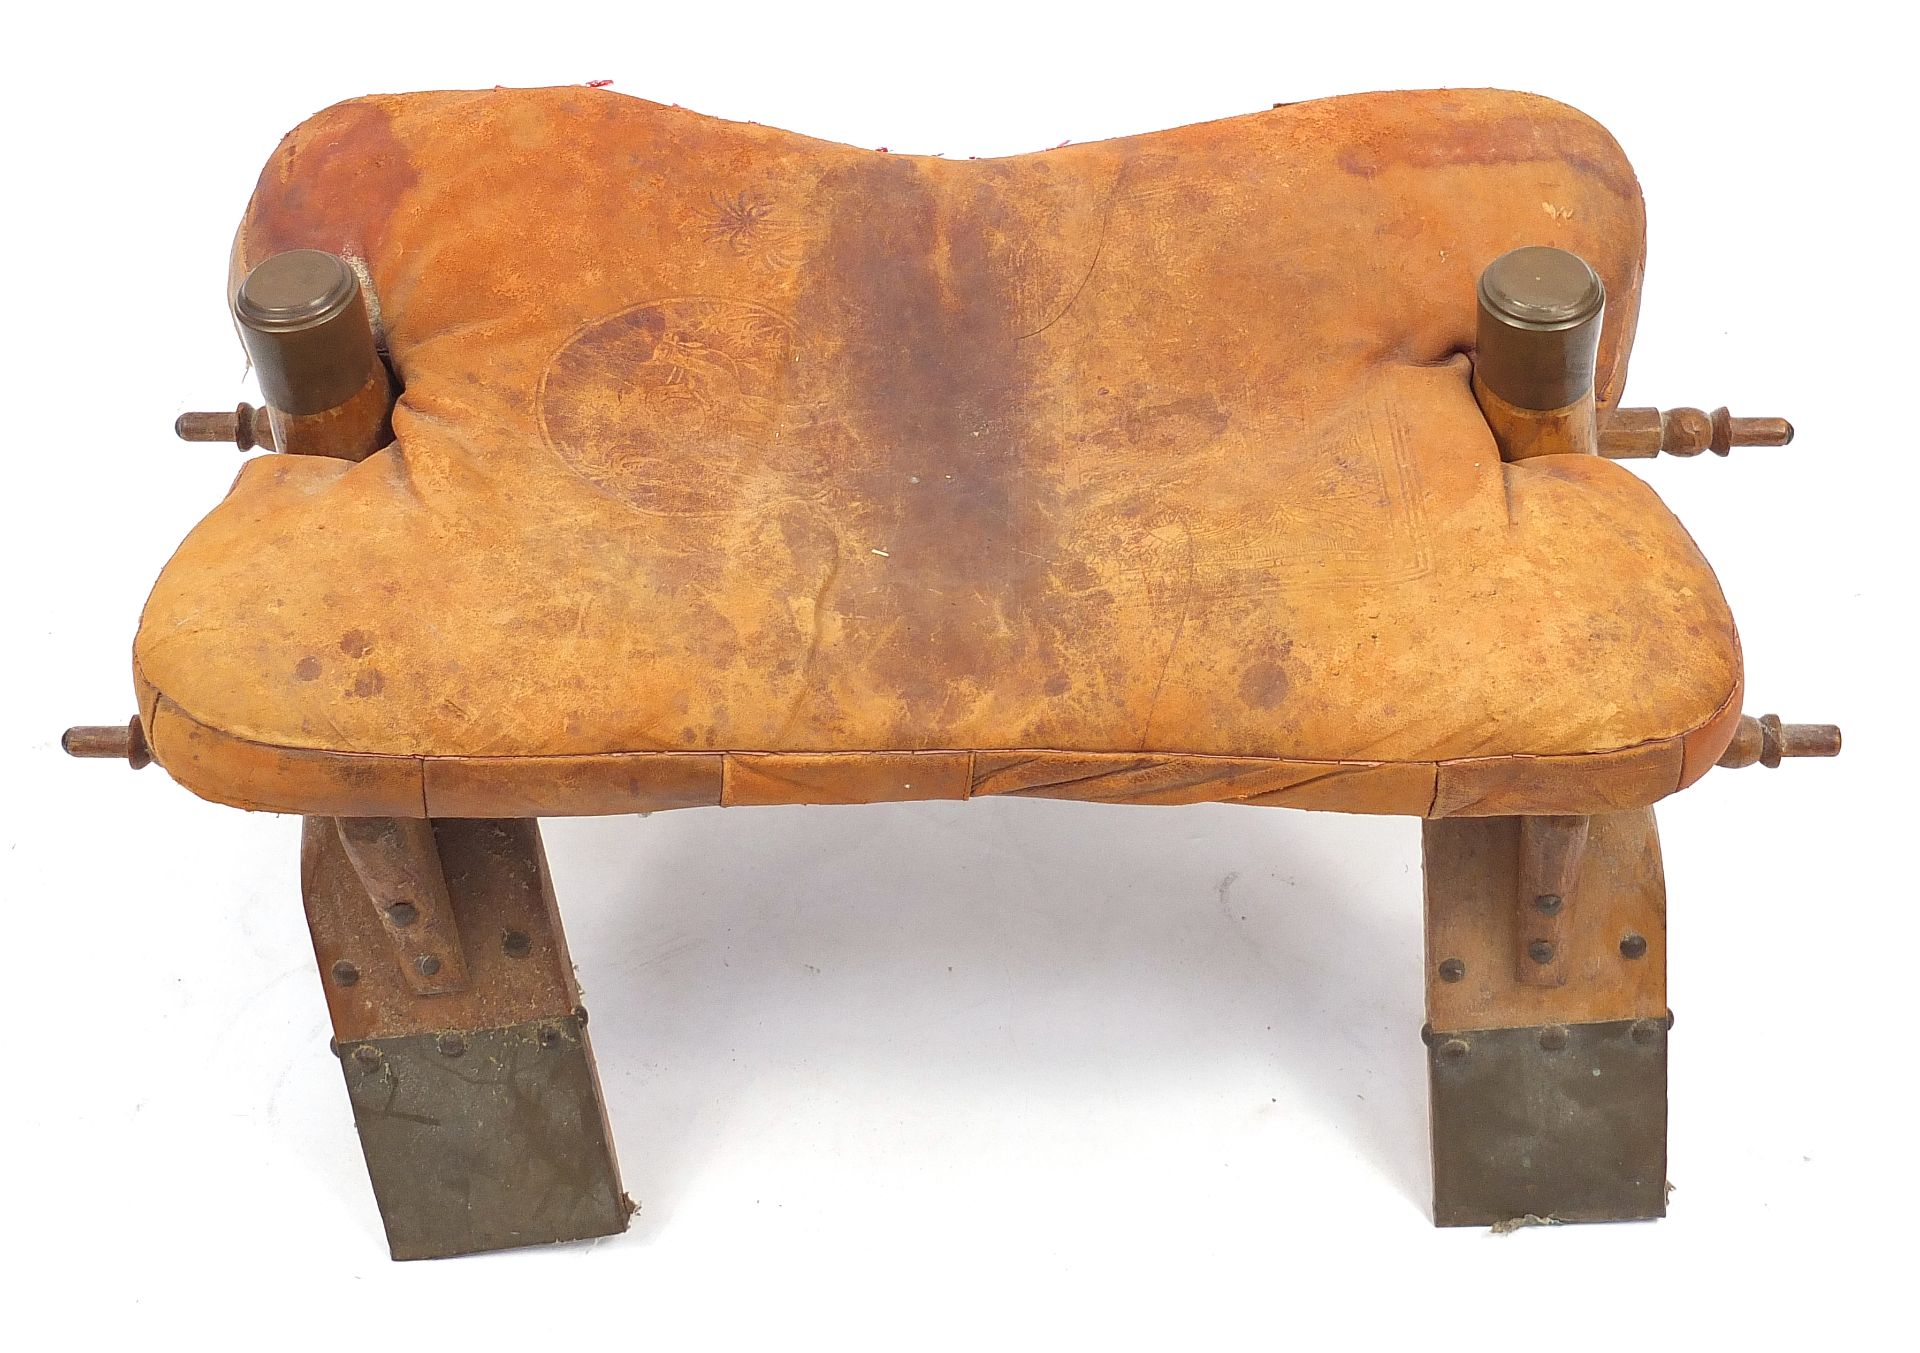 Wooden camel stool with leather cushion, 65cm wide - Image 3 of 5